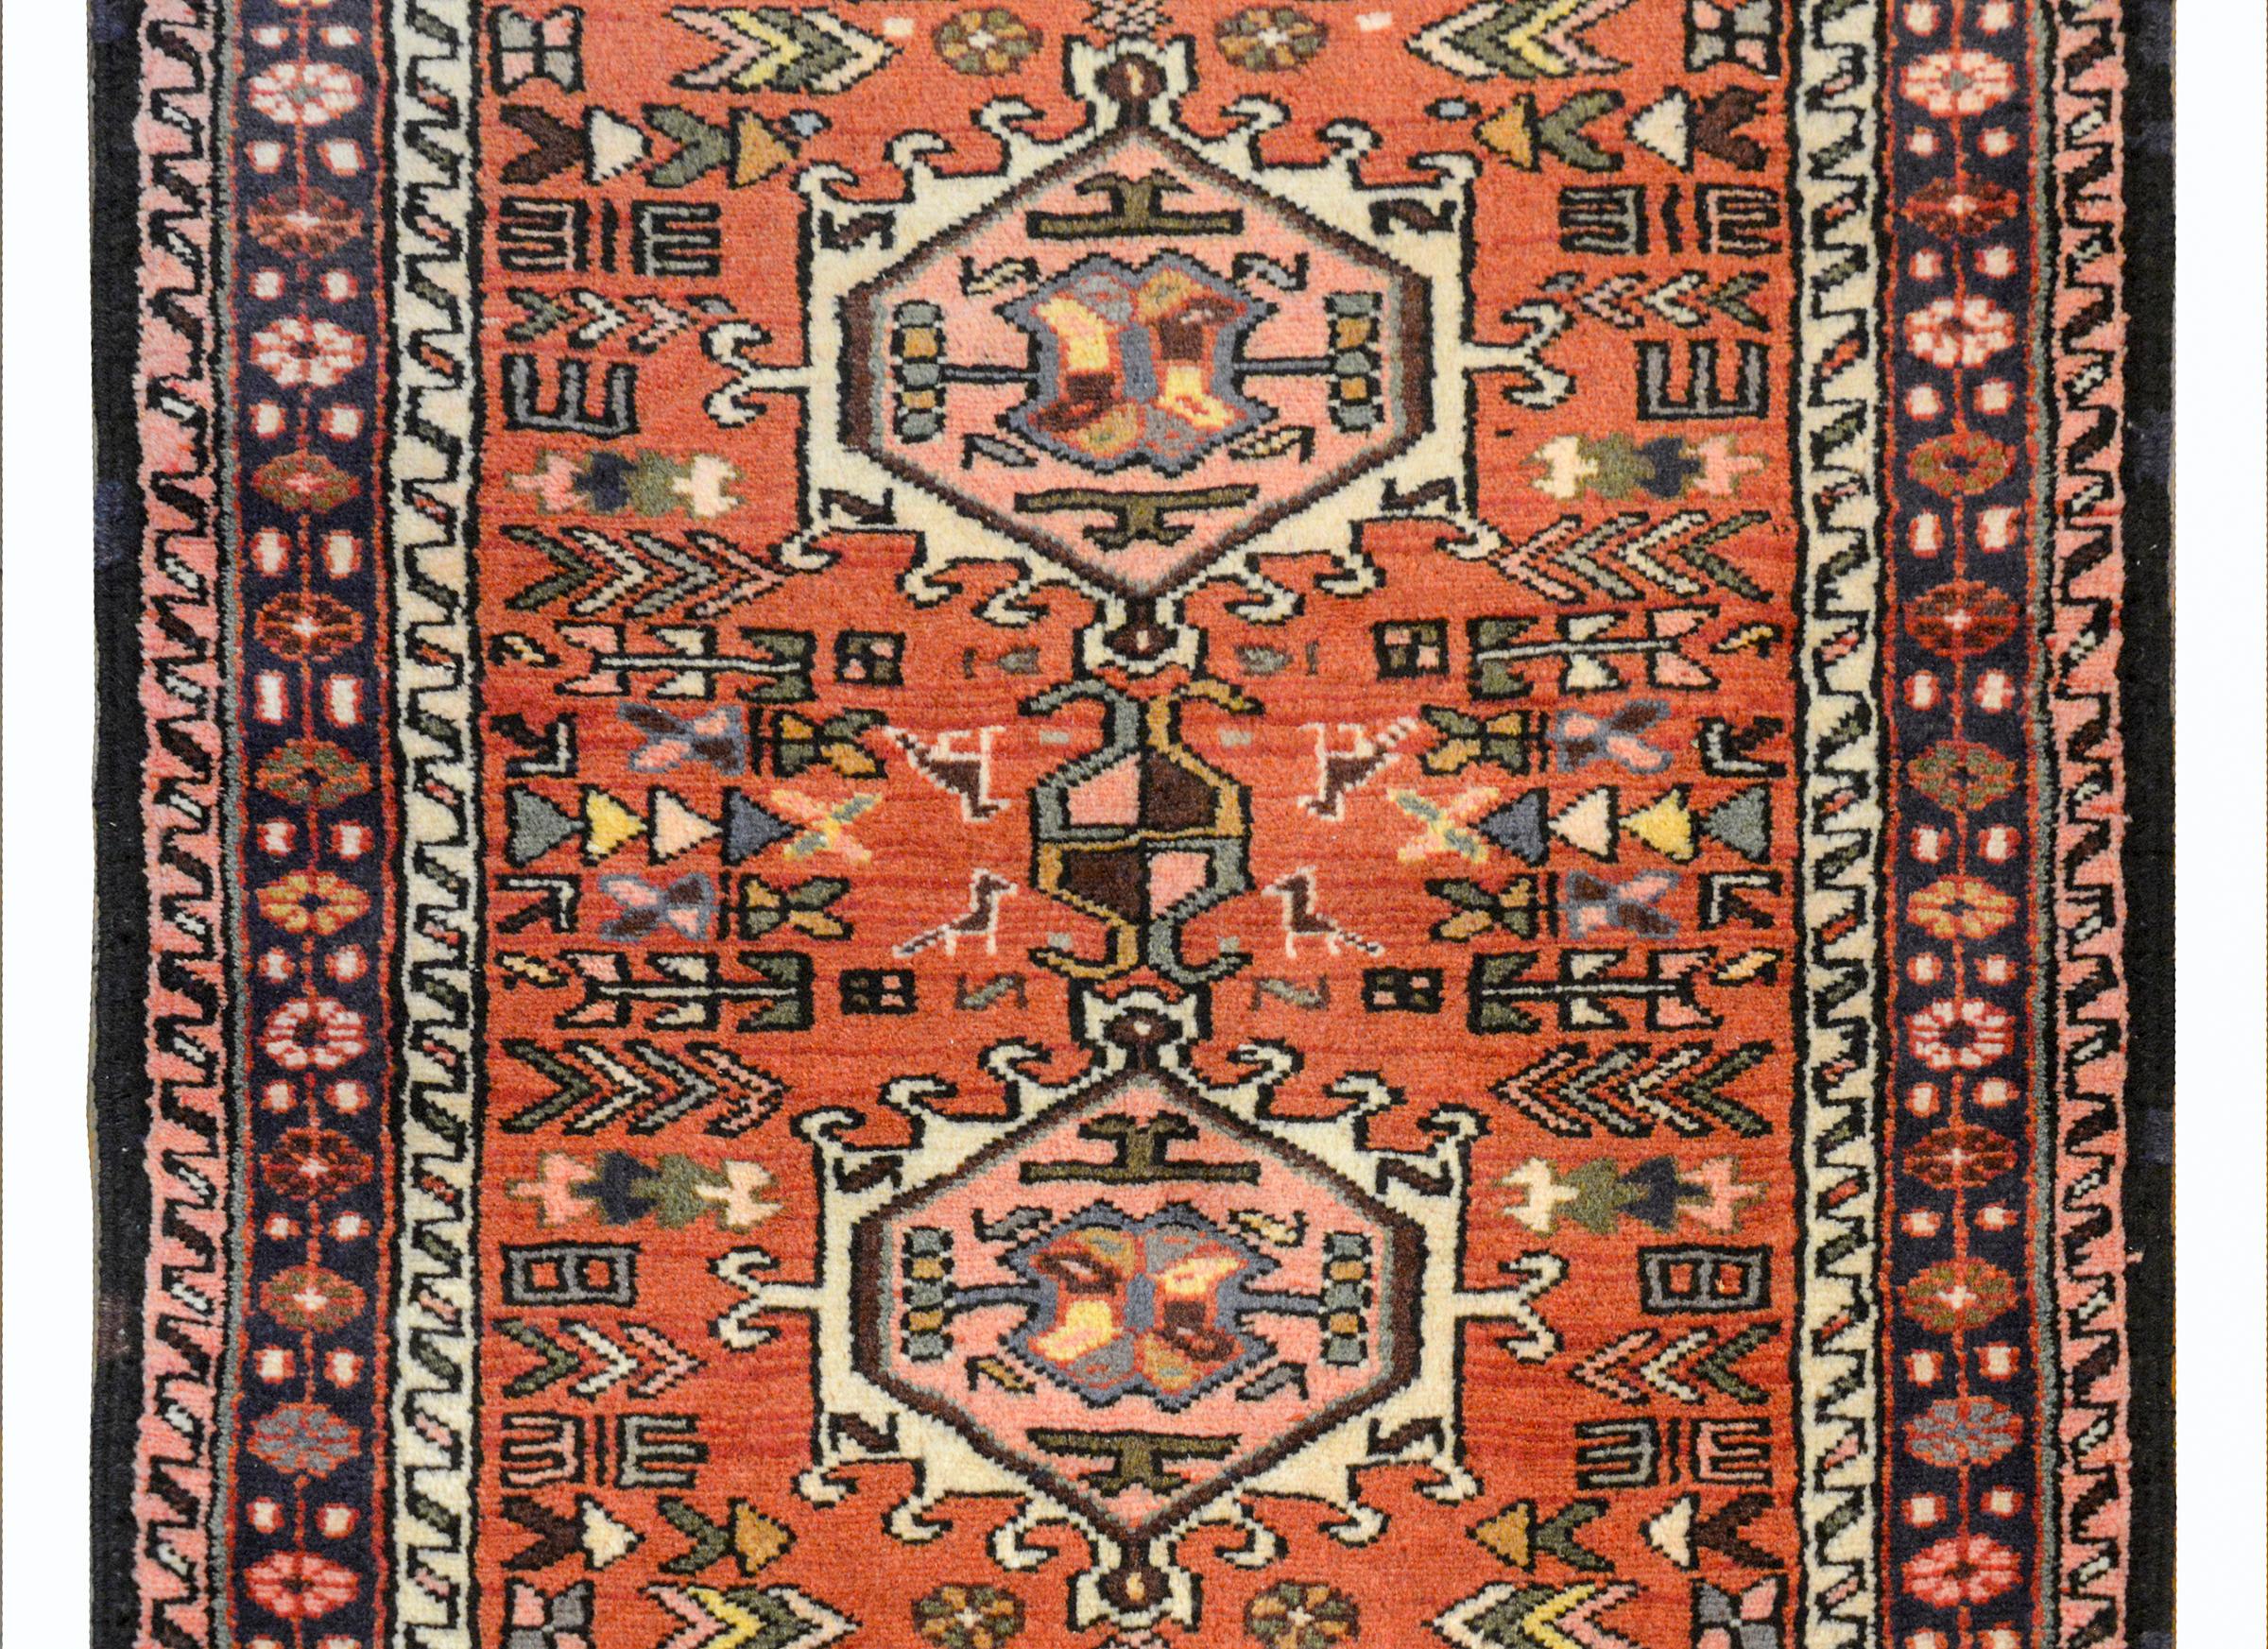 A wonderful mid-20th century Persian Karadja runner with several stylized floral medallions woven in myriad colors including violet, pink, white, coral, gray, and gold amidst a field of more stylized flowers against a coral background. The border is